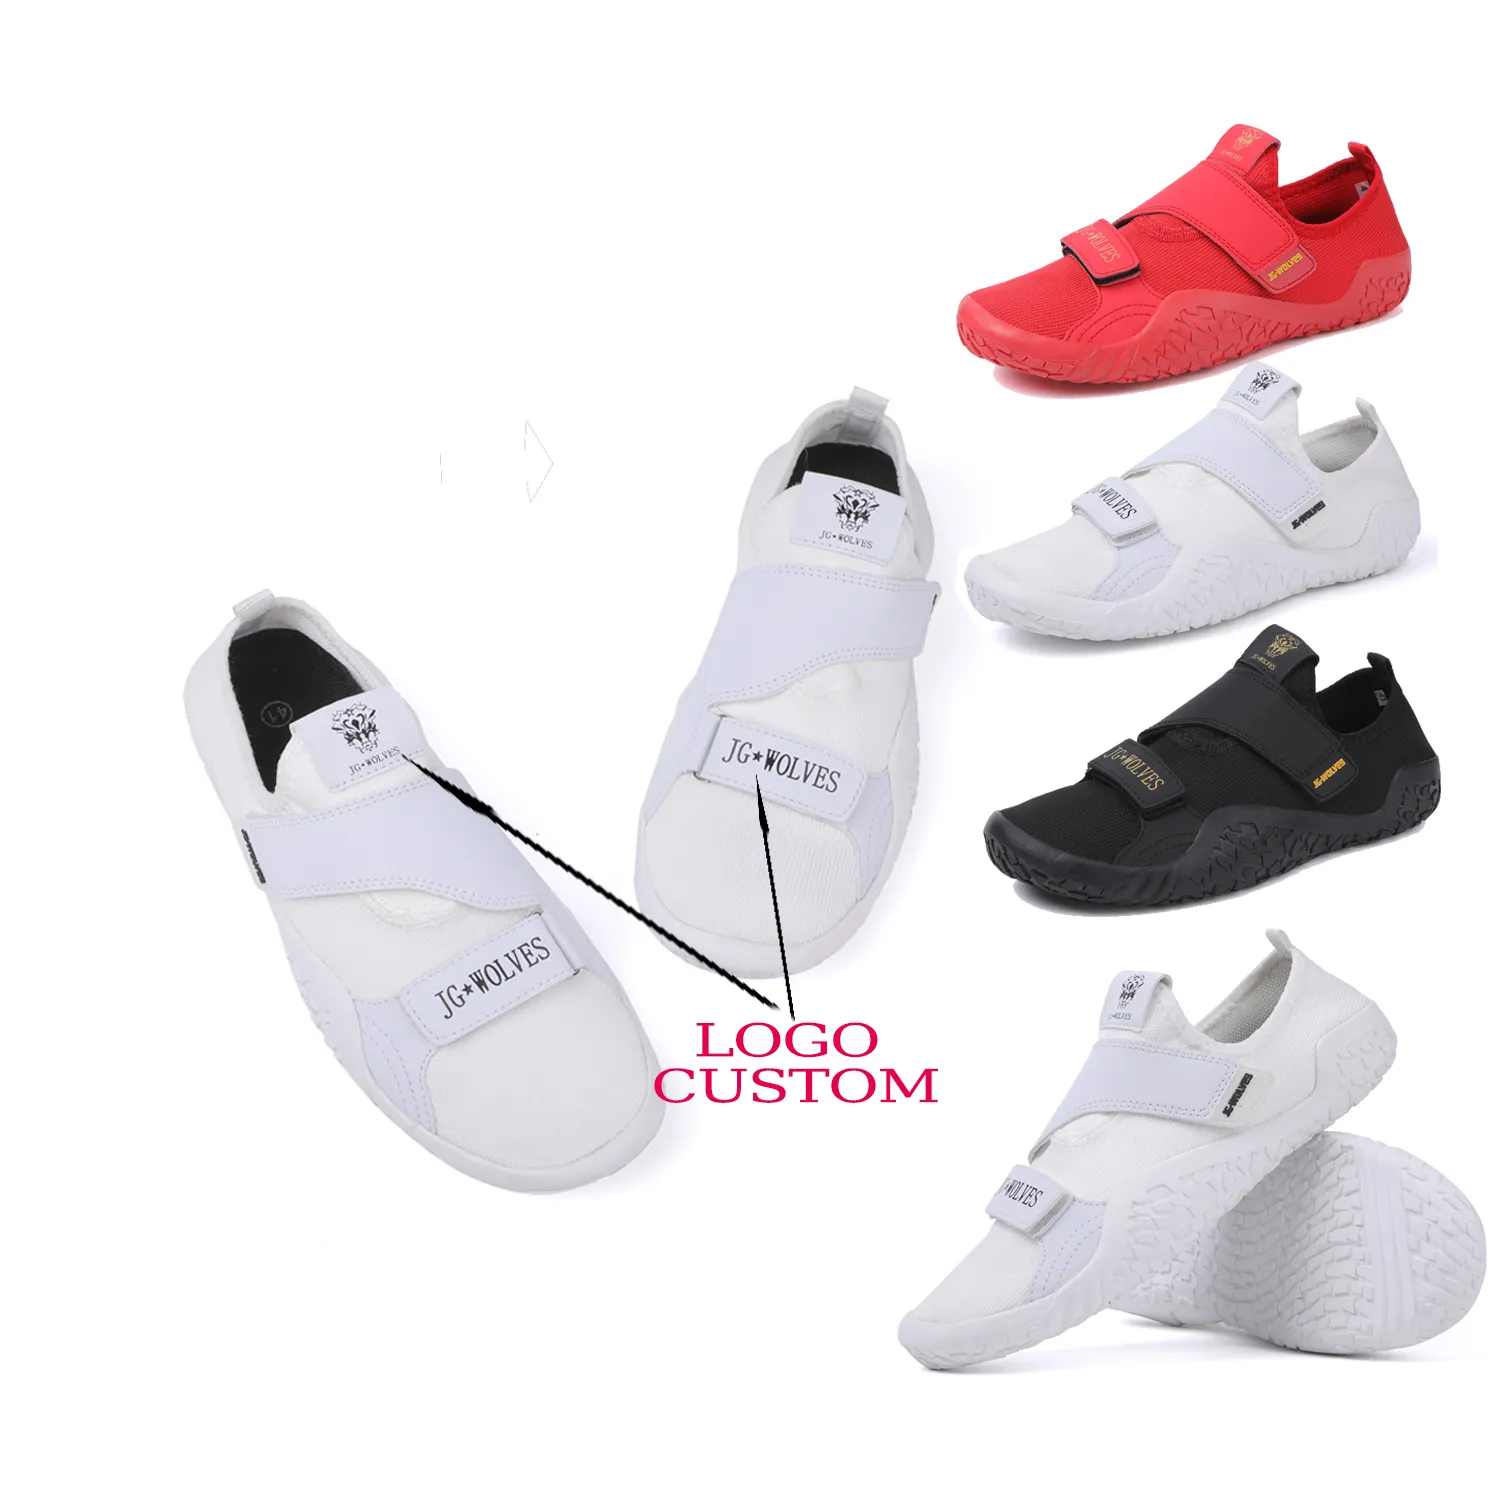 Women's Knitting Non-slip Sports Shoes - Perfect for Yoga  Fitness  Walking  Running   Skipping